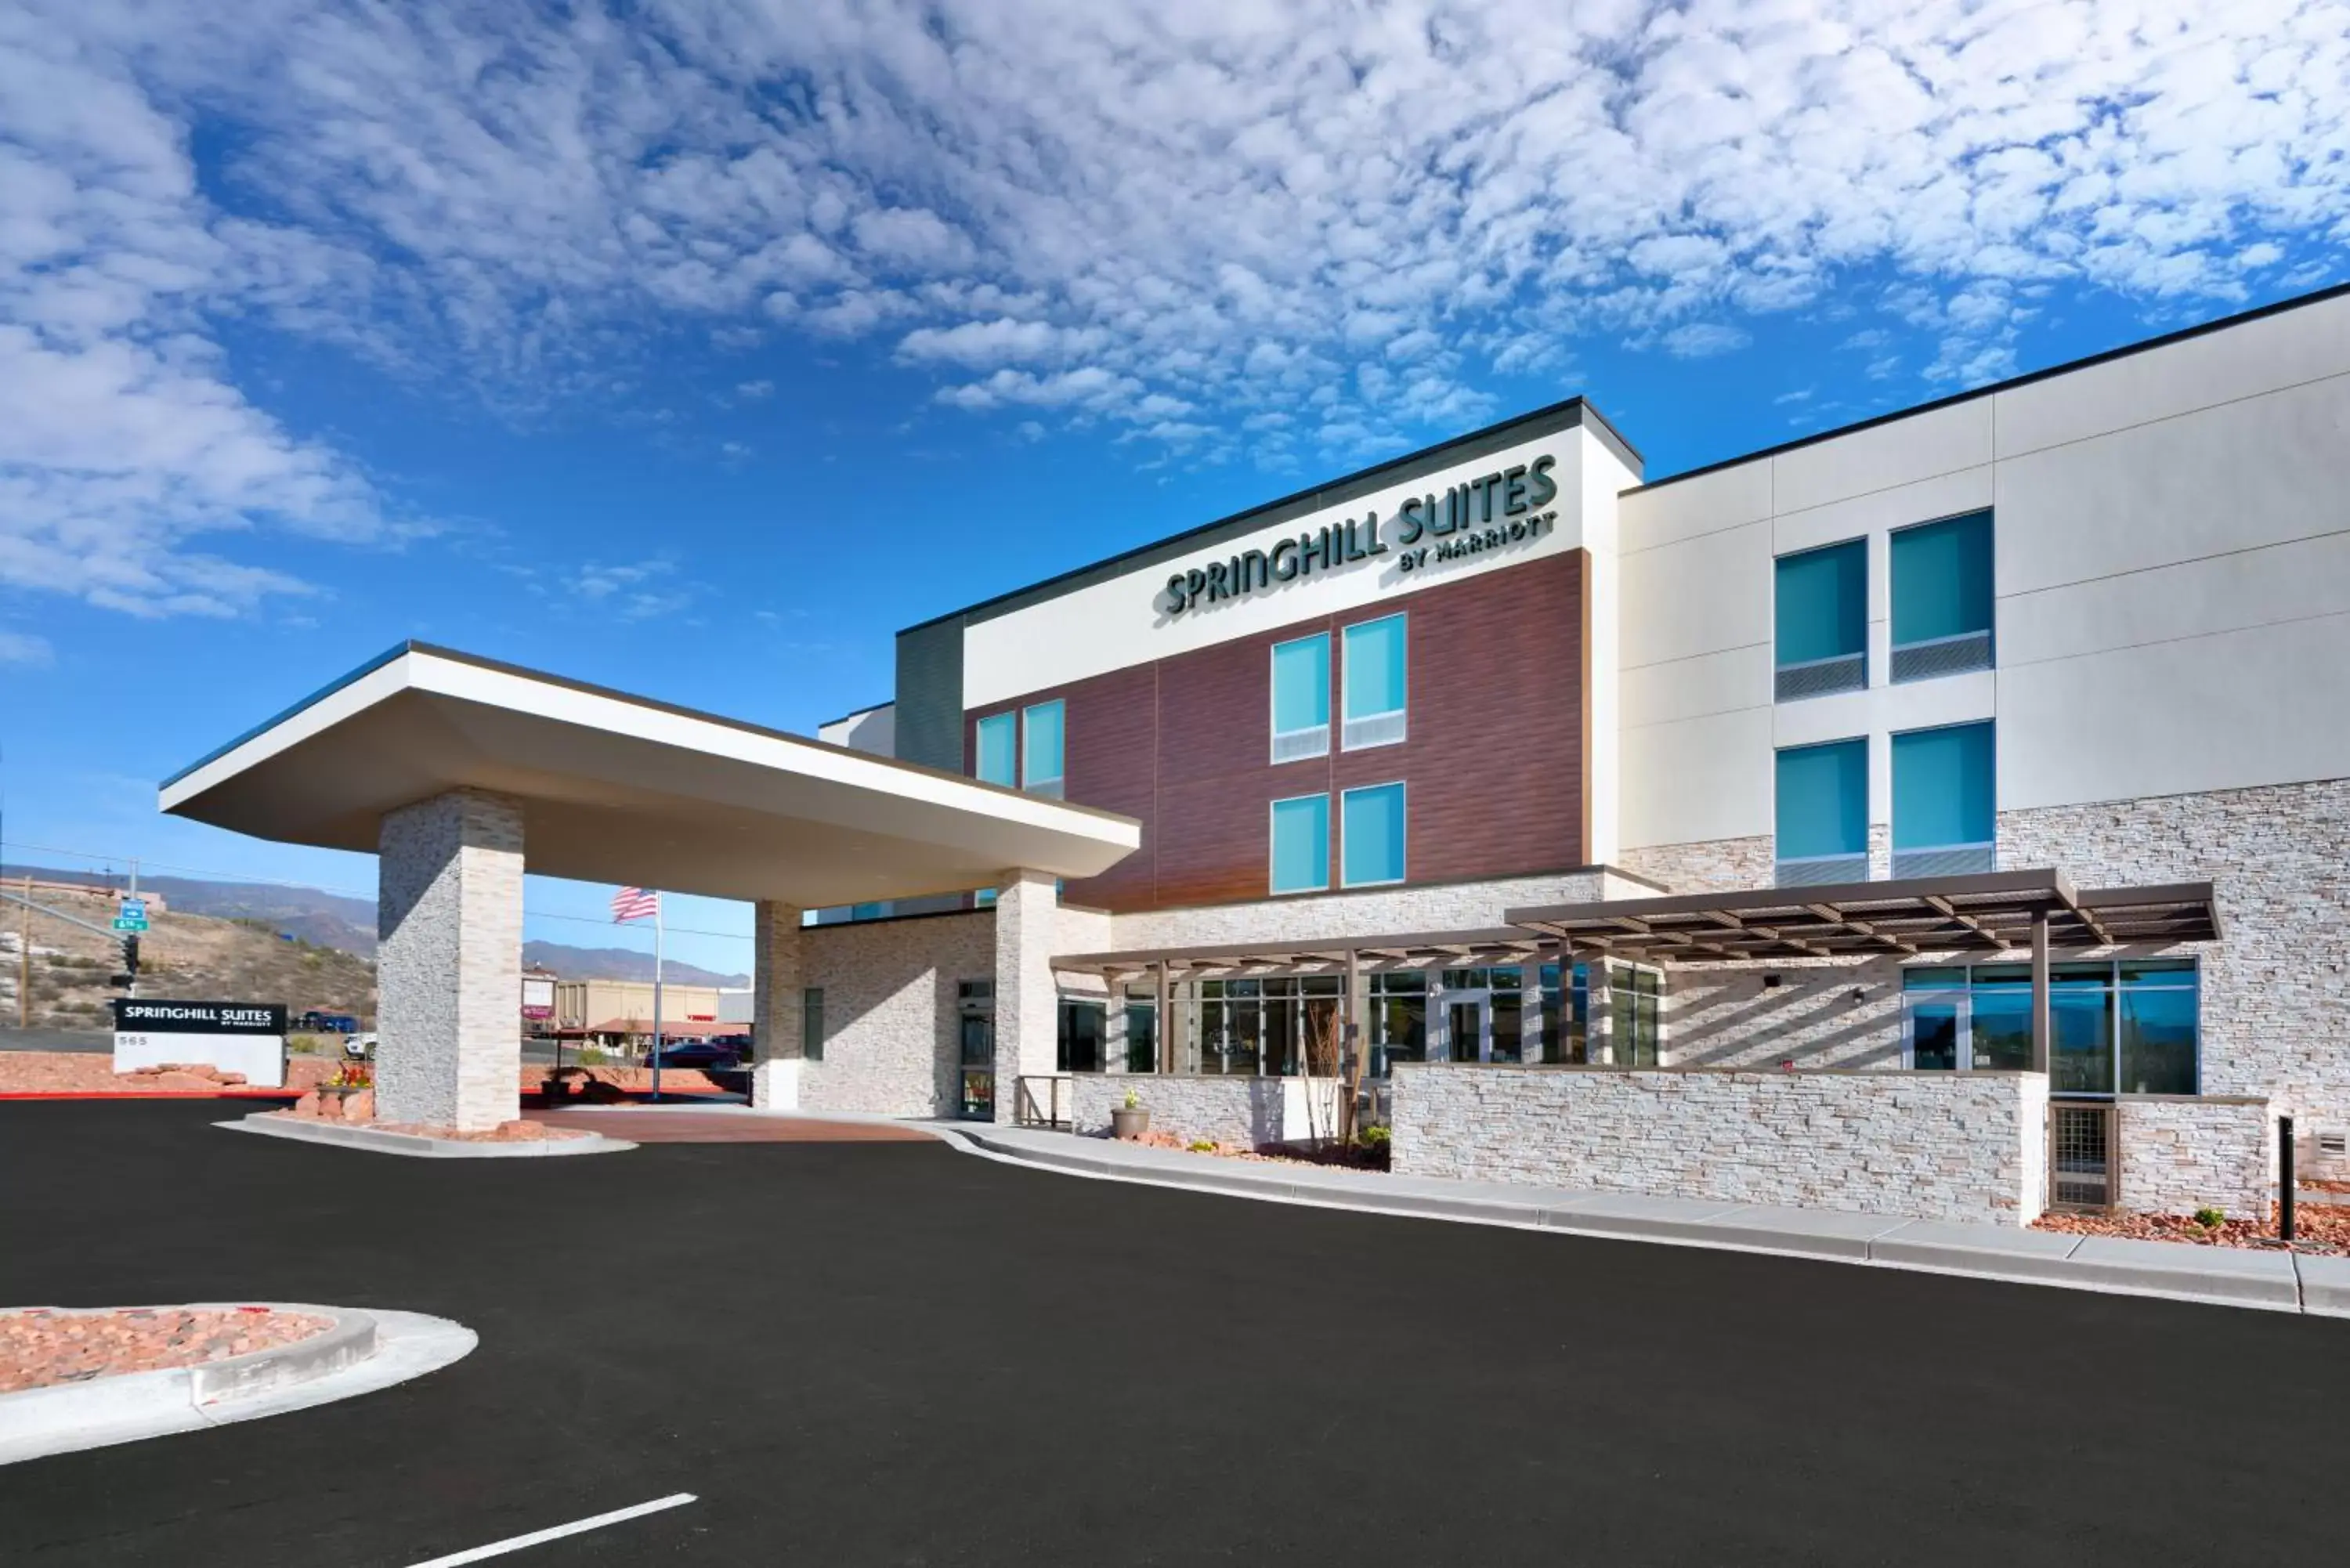 Property Building in SpringHill Suites by Marriott Cottonwood